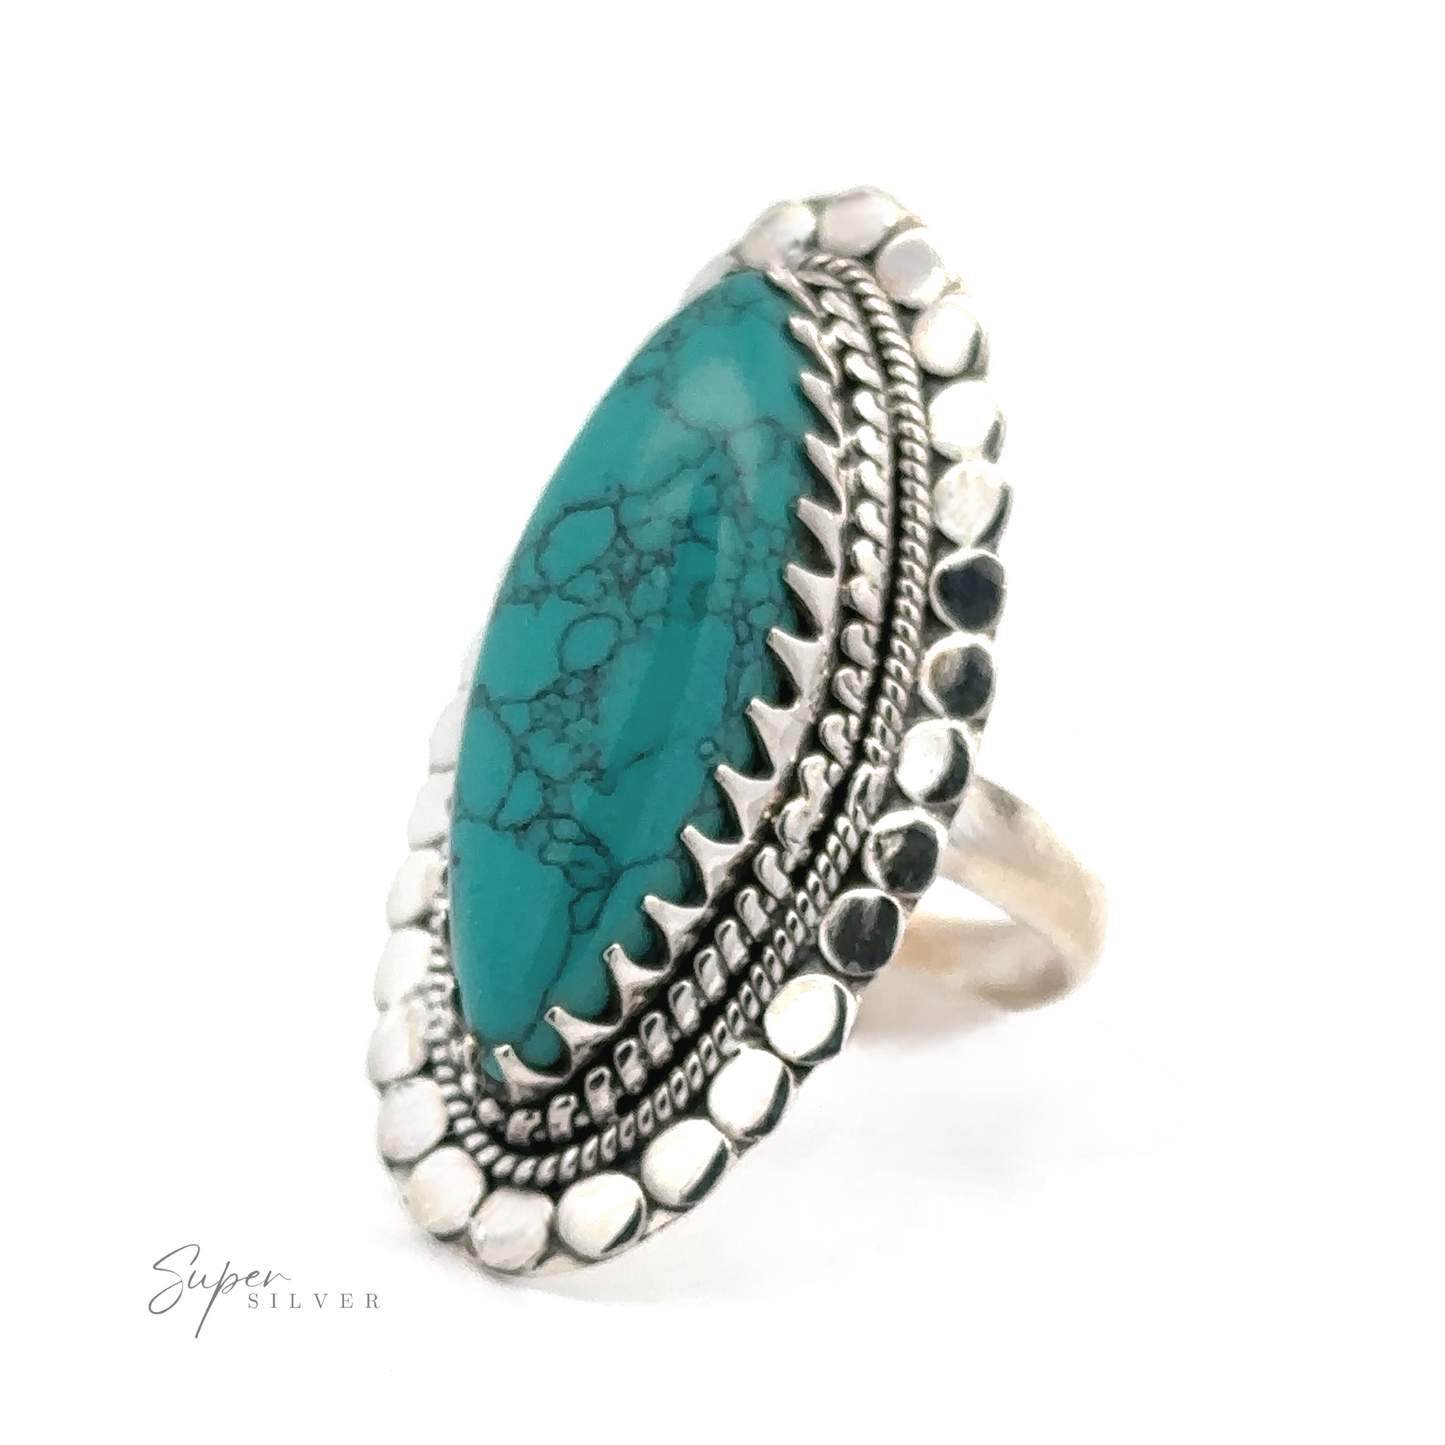 
                  
                    A Statement Marquise Shaped Gemstone Ring featuring an elongated turquoise stone with black veining, surrounded by an ornate beaded and scalloped design, embodies the essence of bohemian jewelry.
                  
                